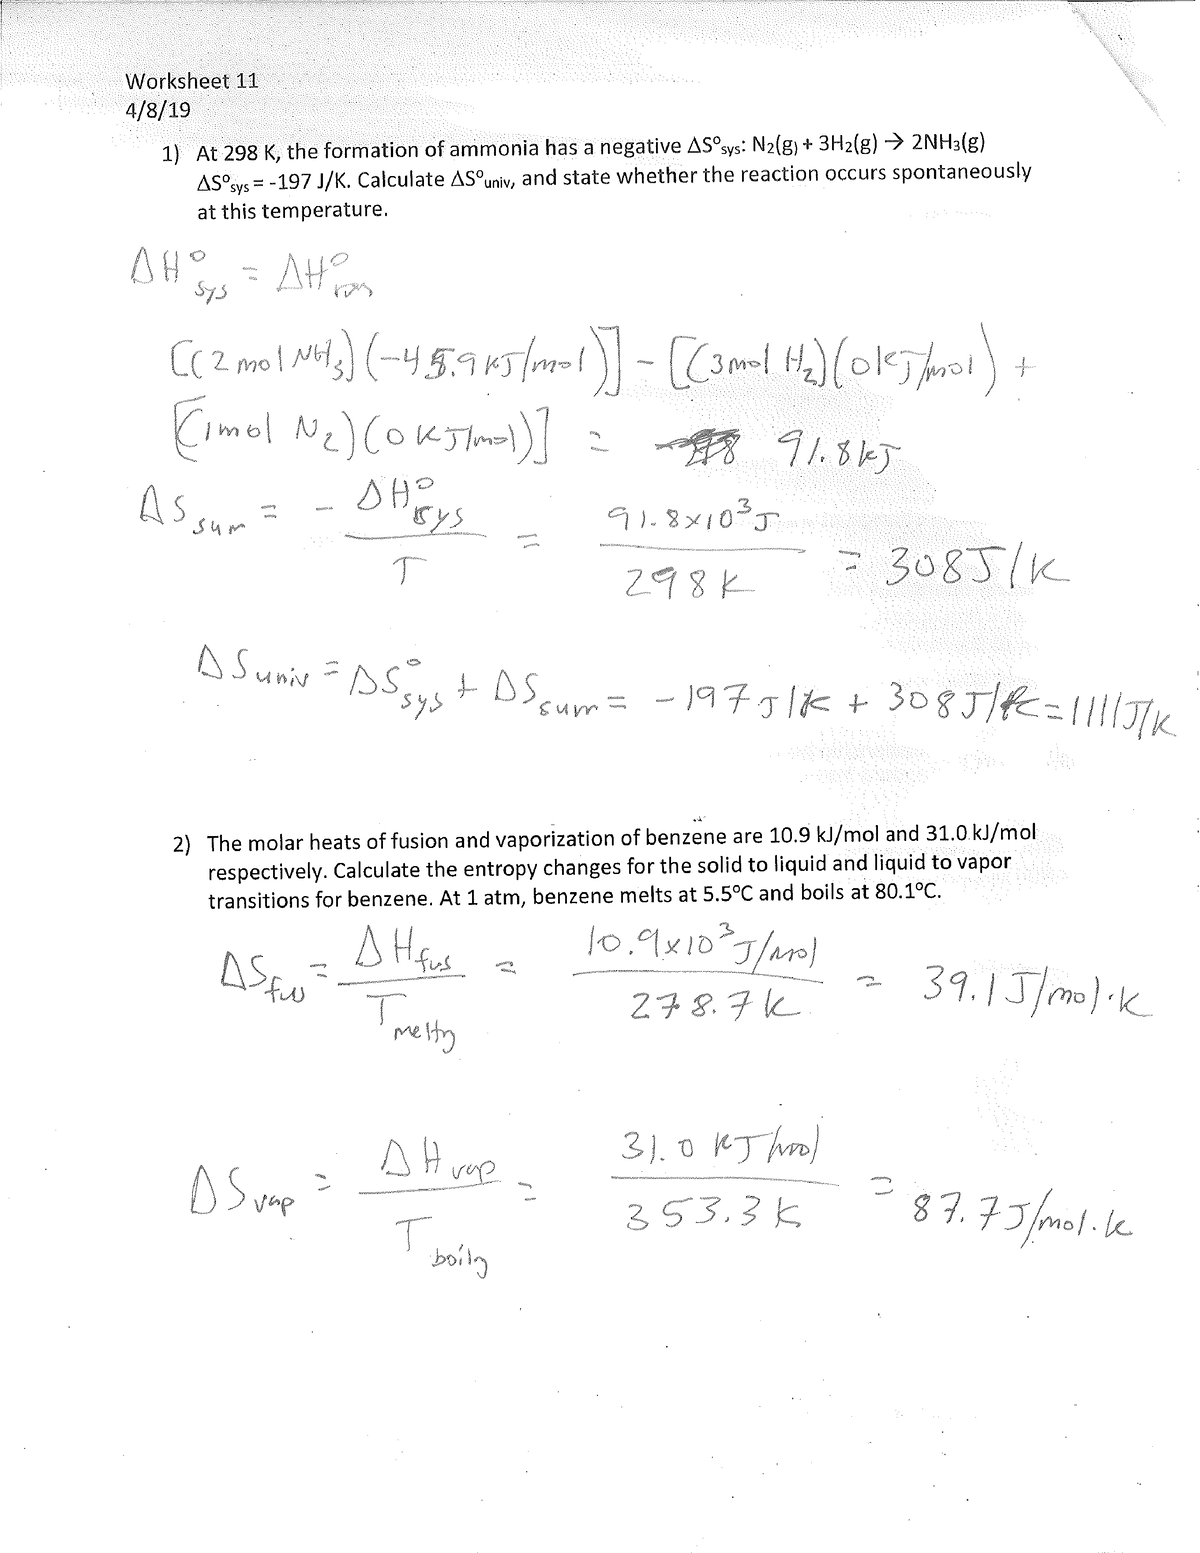 Worksheet 11 Answers Answer key to the practice questions on